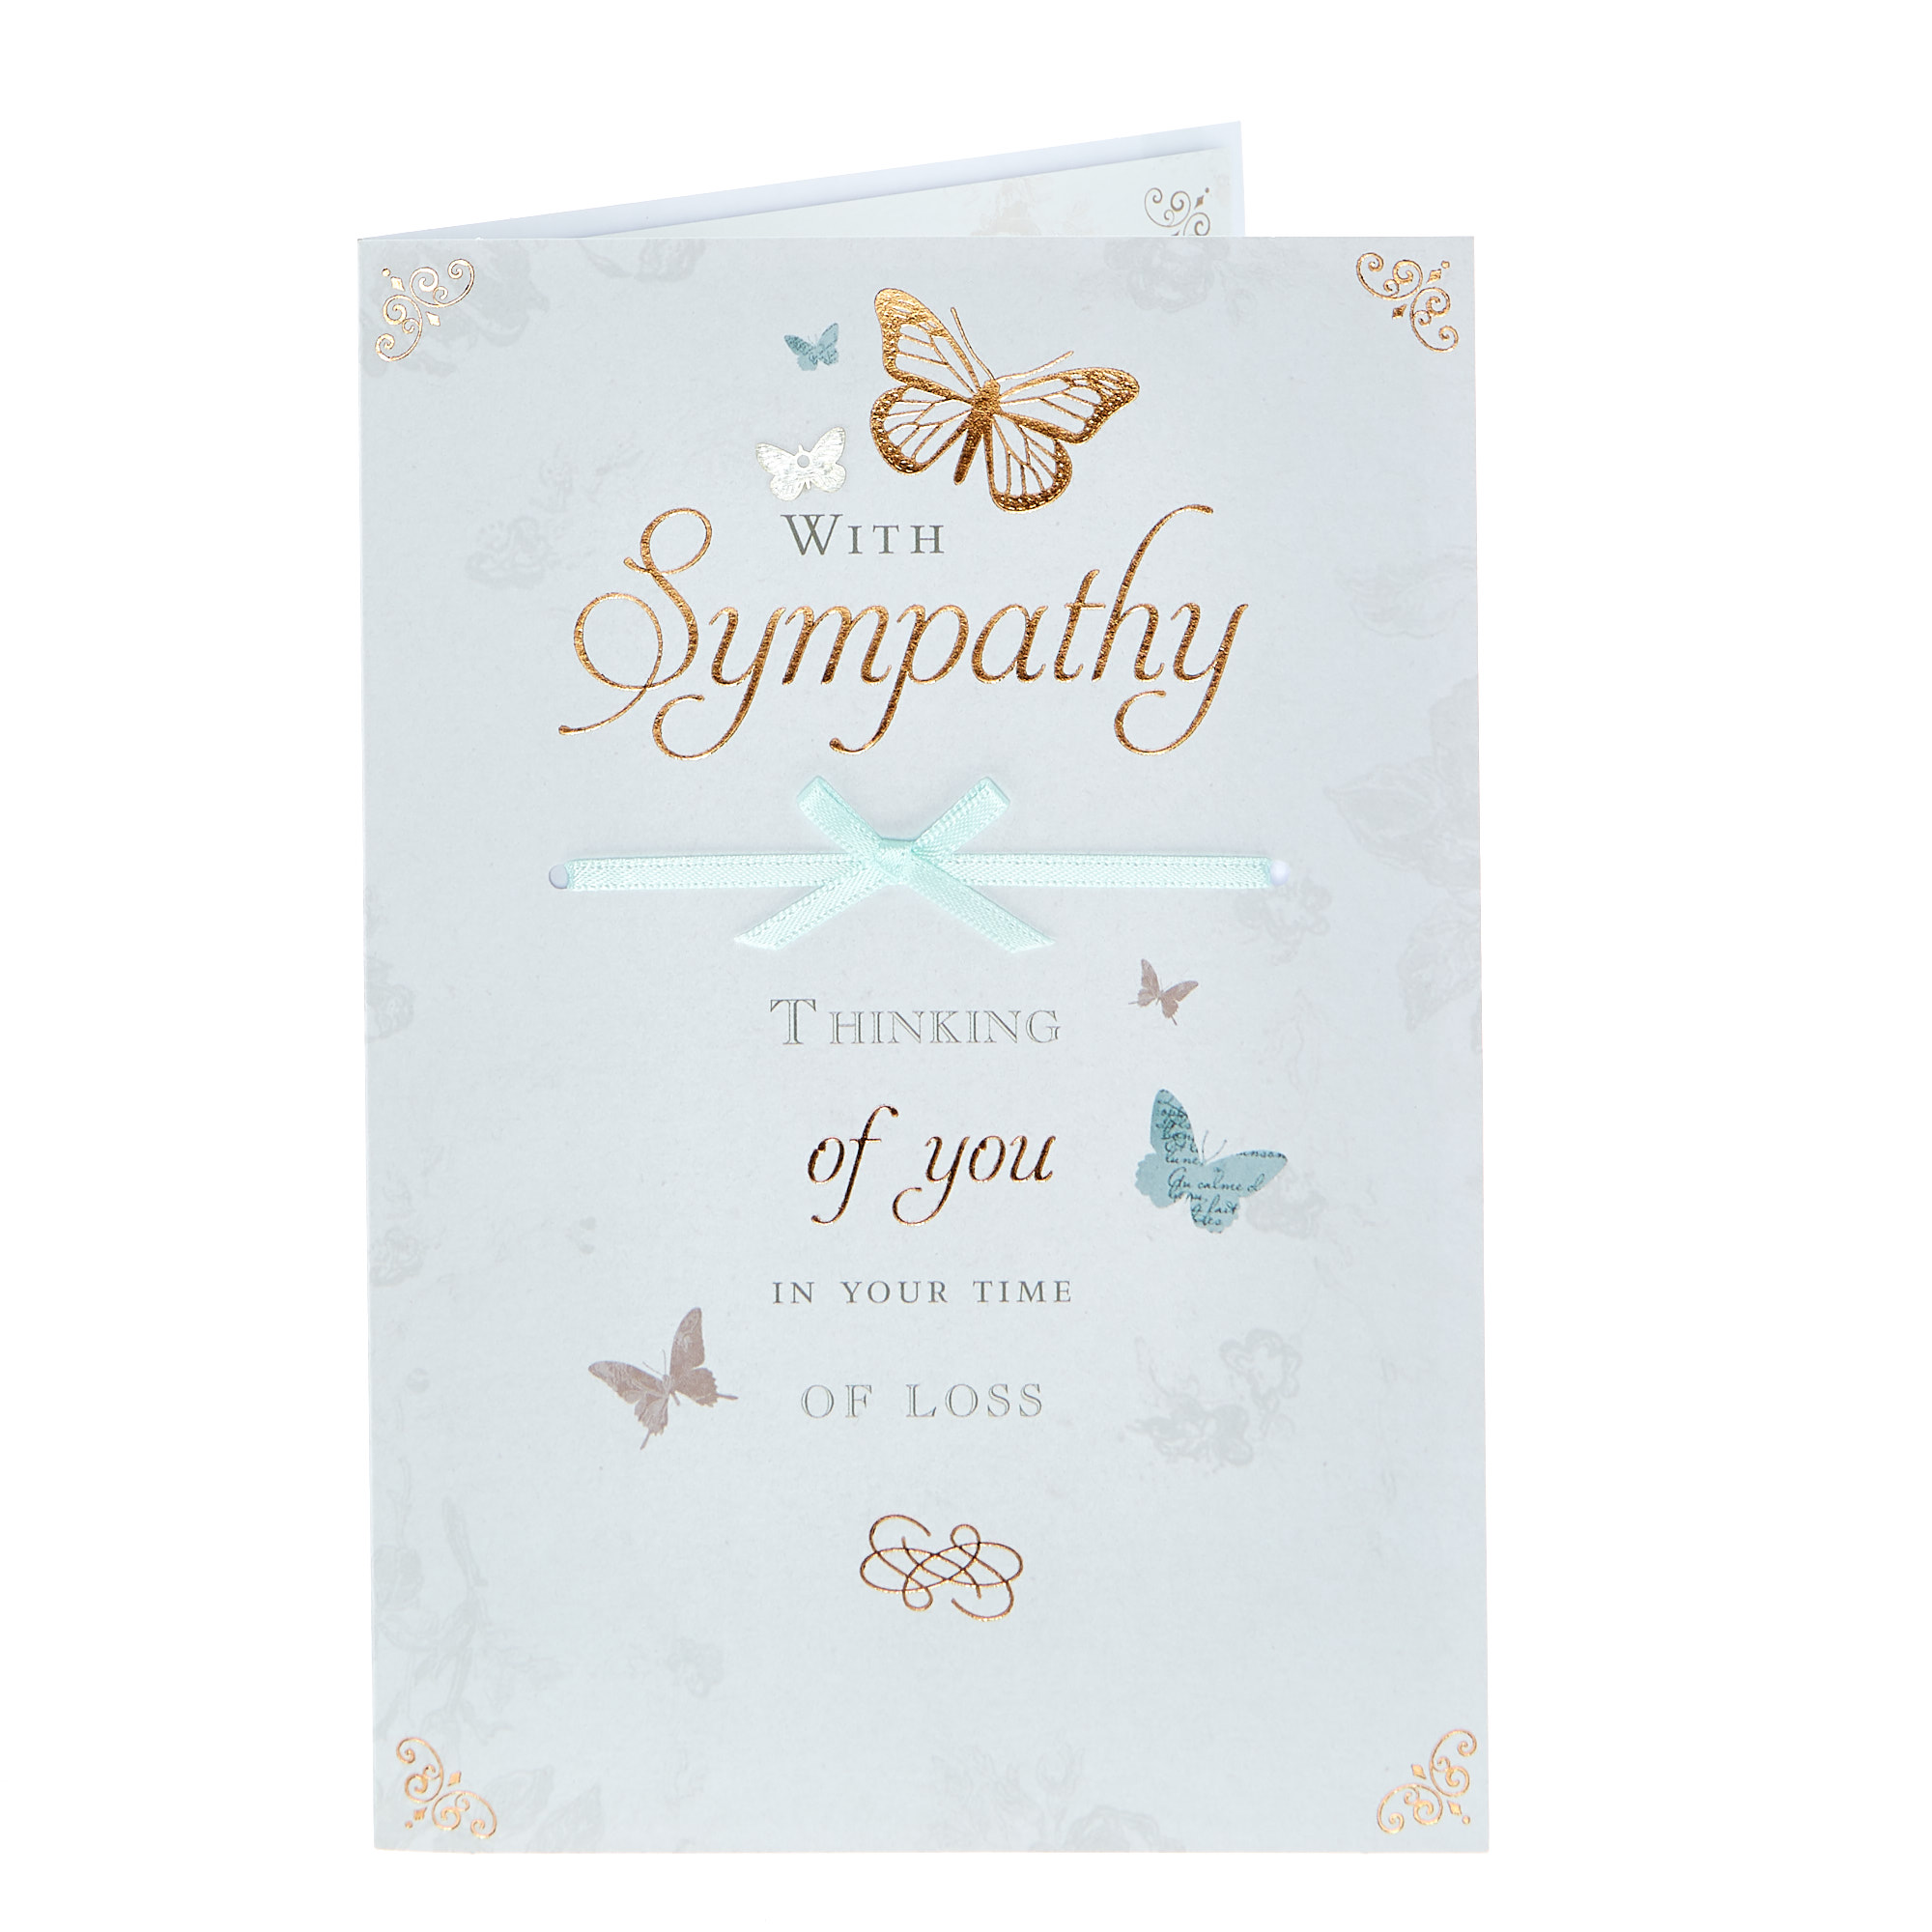 Buy Sympathy Card - In Your Time Of Loss for GBP 0.79 | Card Factory UK